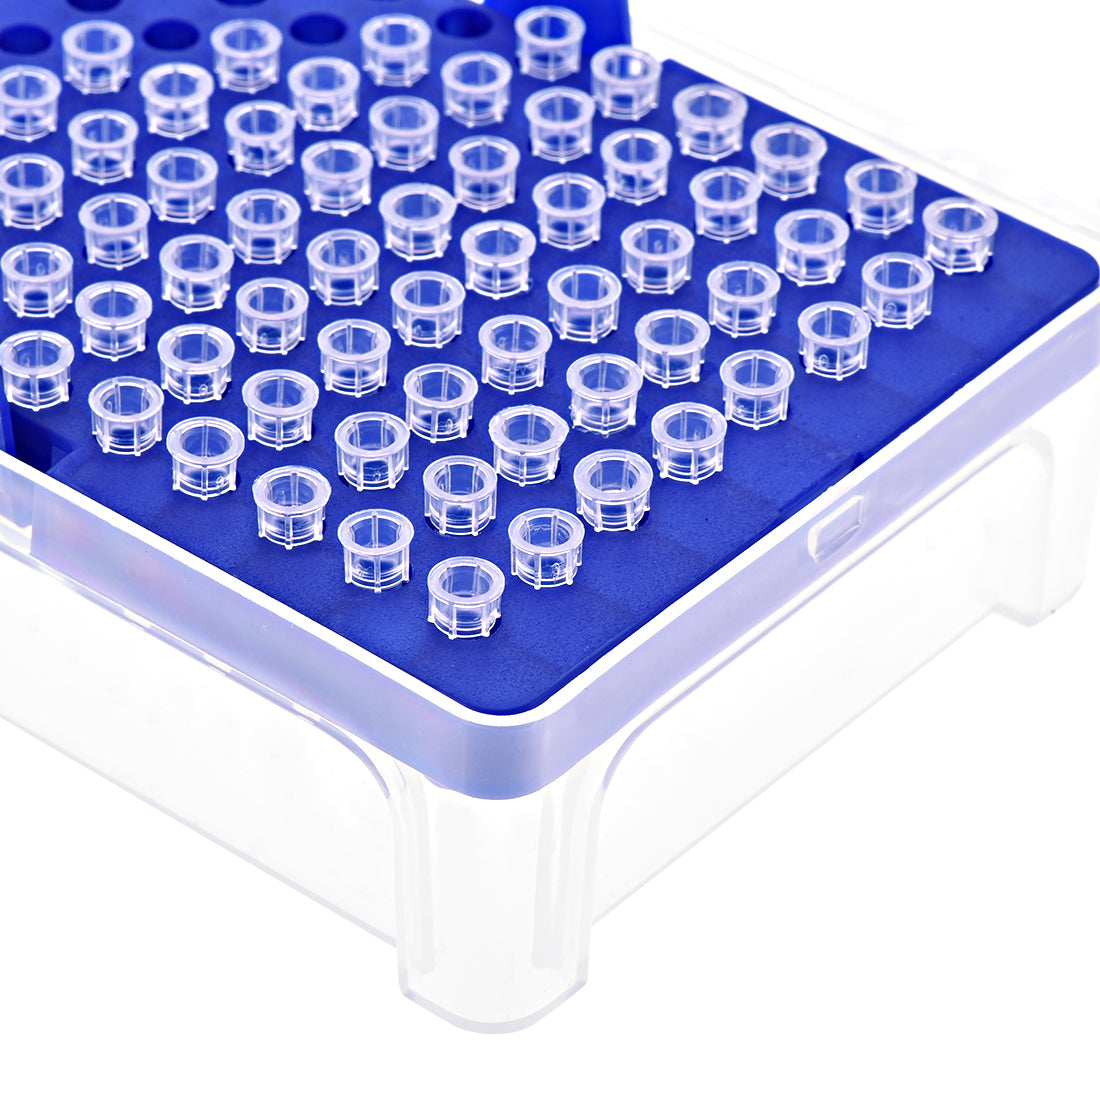 uxcell Uxcell Pipette Tips Box 96-Well Polypropylene Tip Holder Container for 10ul Pipettor 4.5mm Hole Diameter Blue